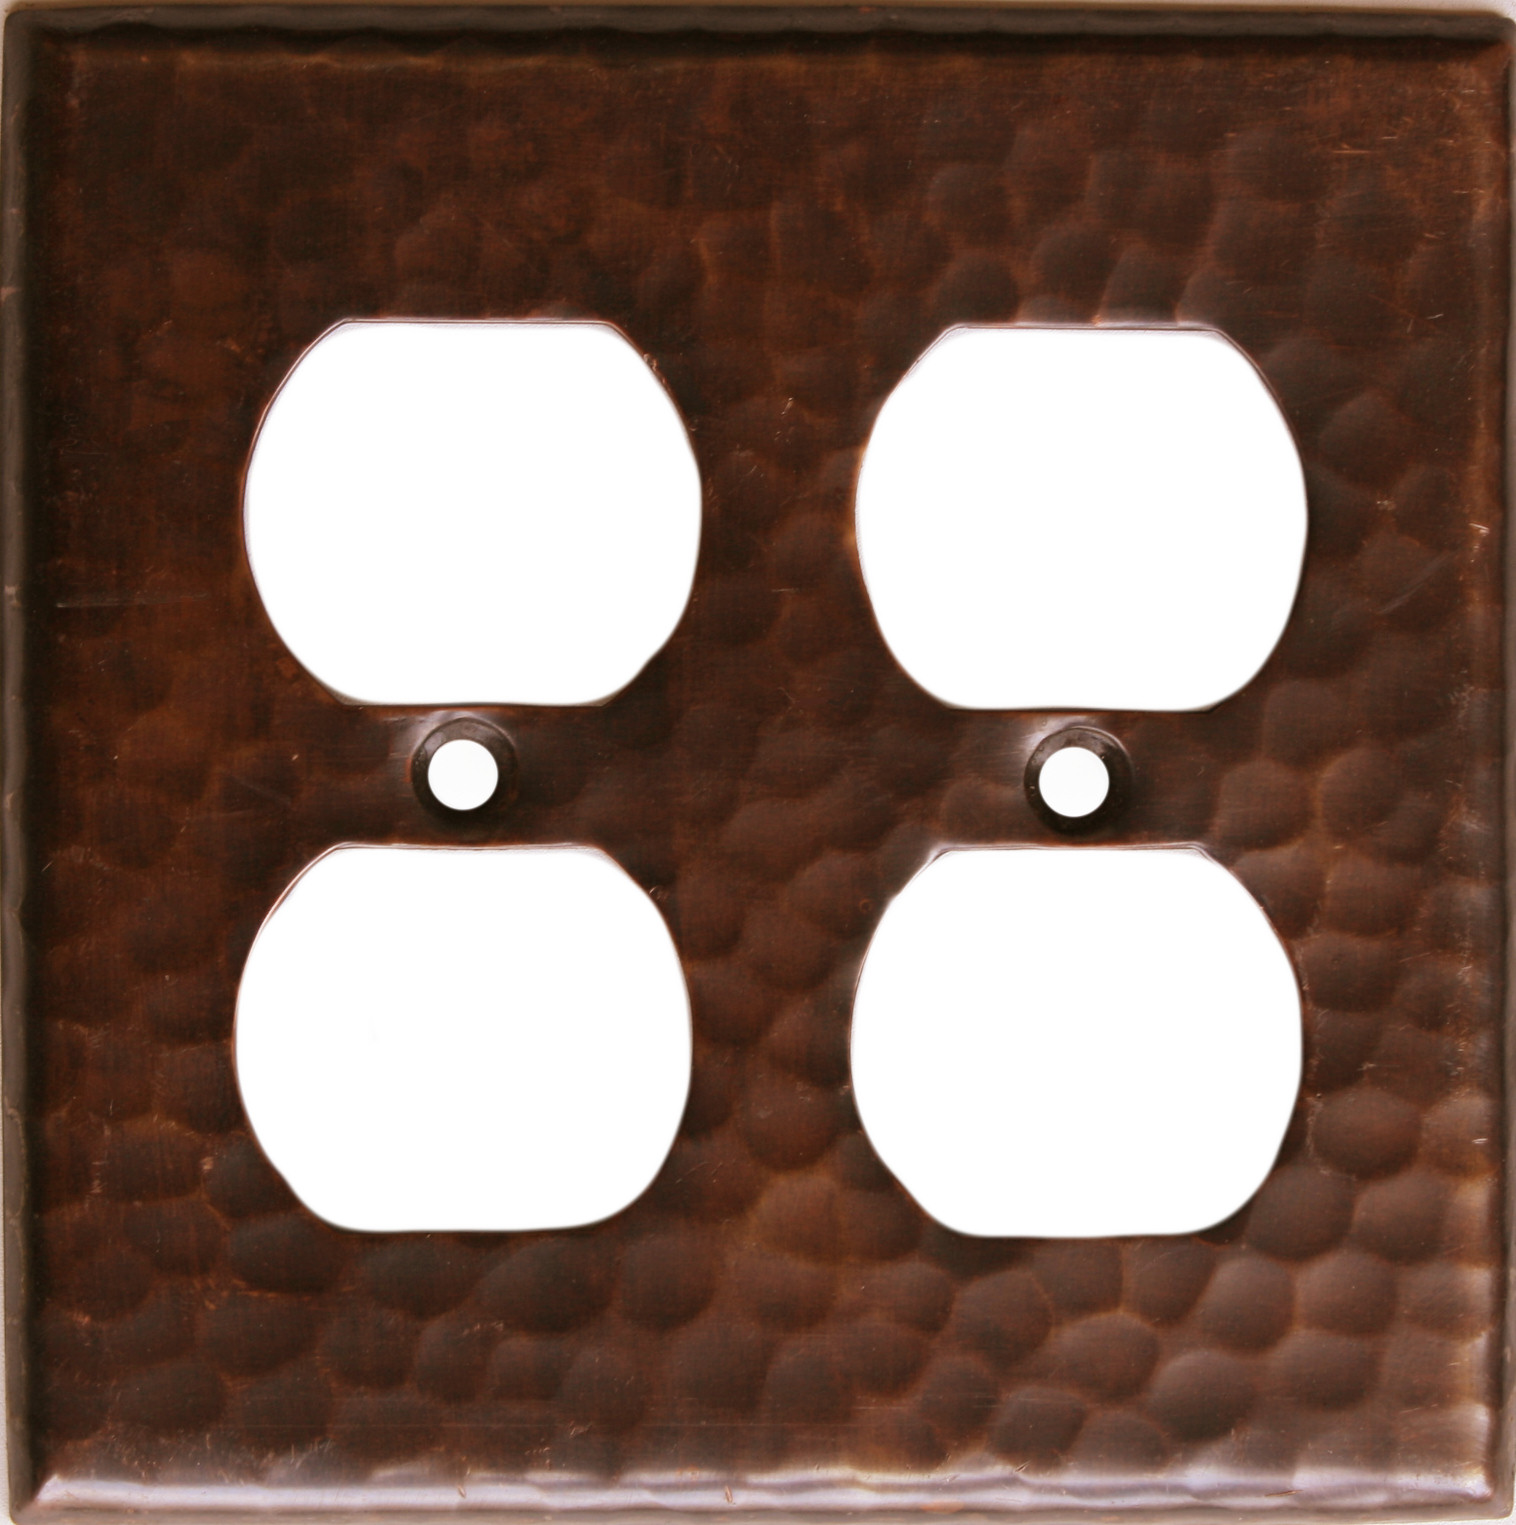 Double Duplex Outlet Hammered Copper Wall Plate